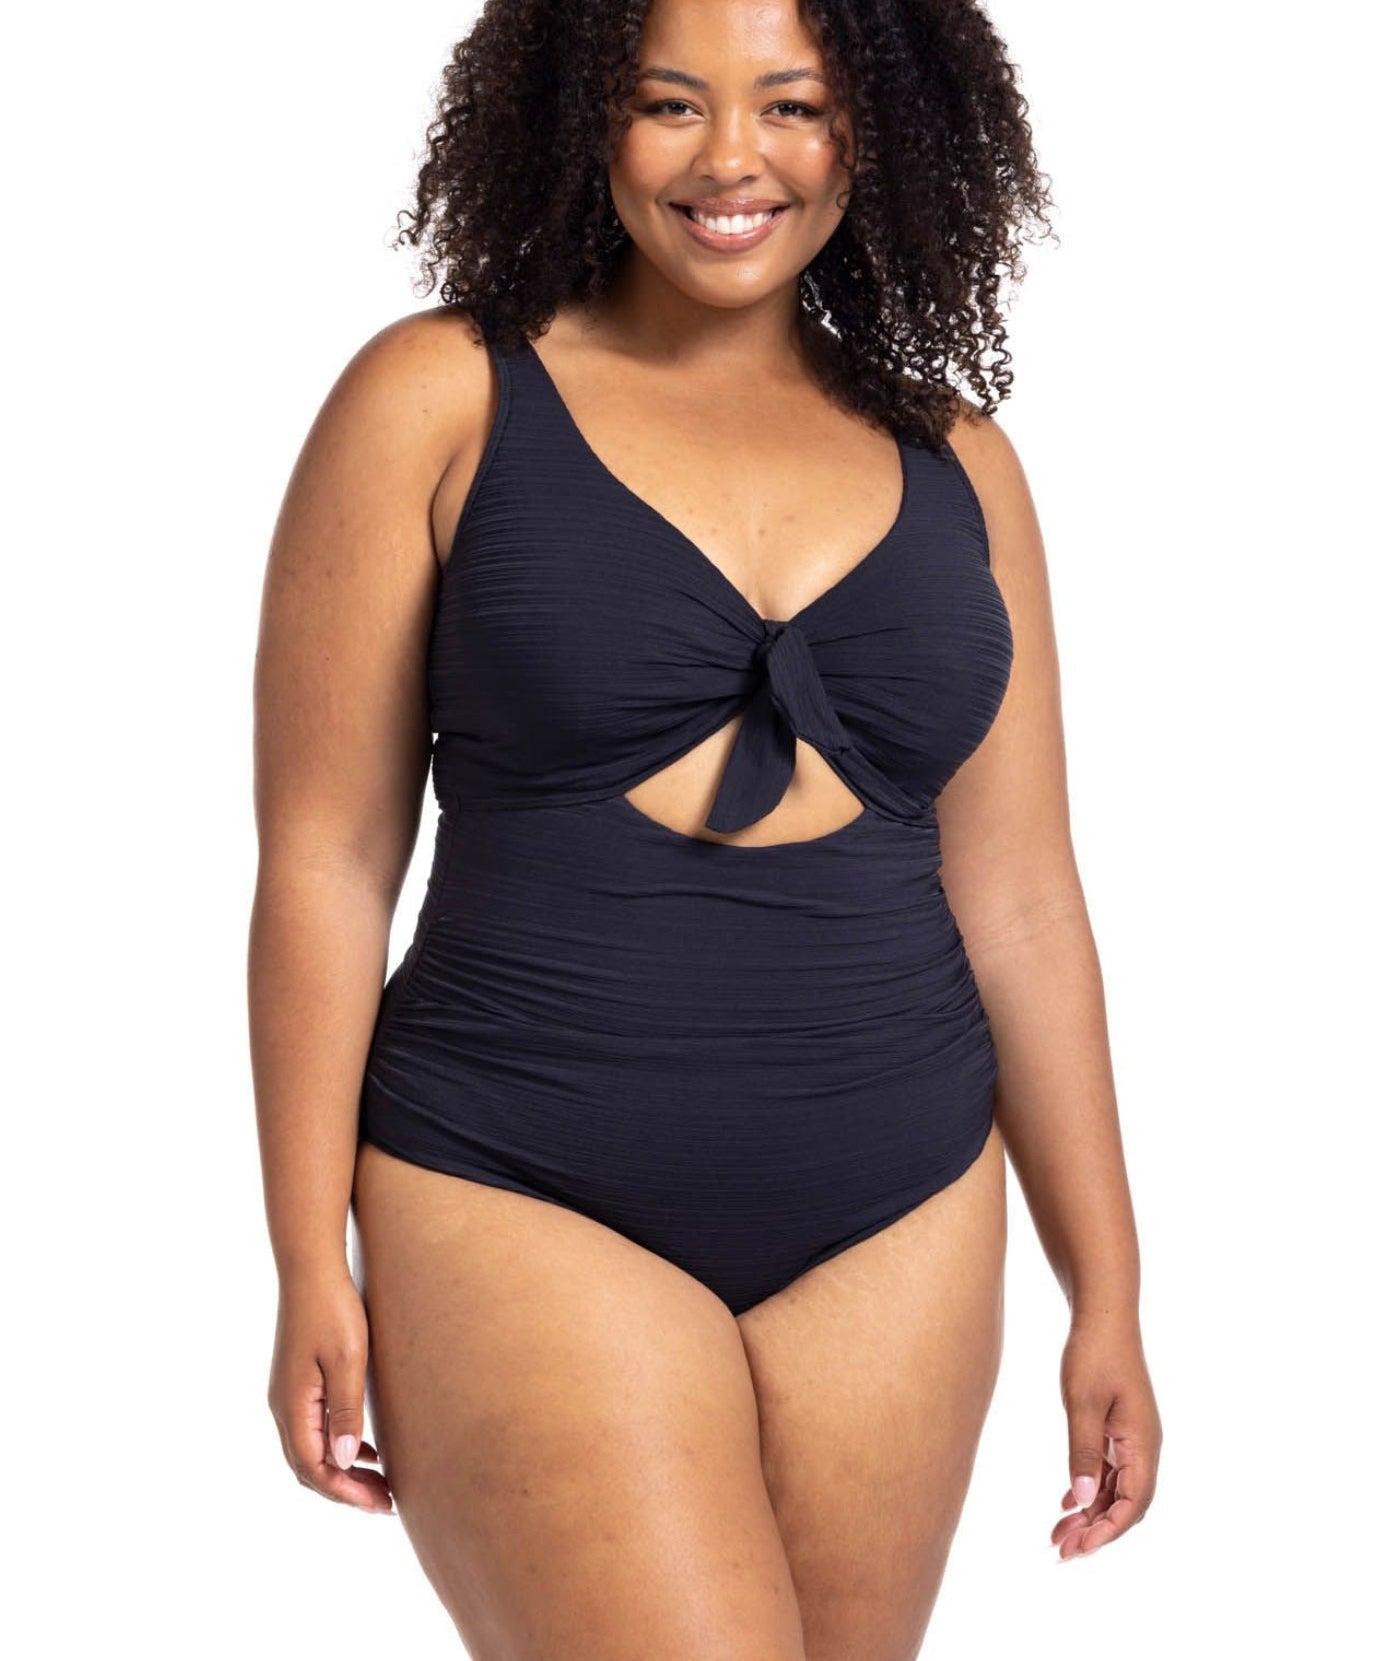 Aria one piece swimsuit by Artesands in black - Blue Sky Fashions & Lingerie